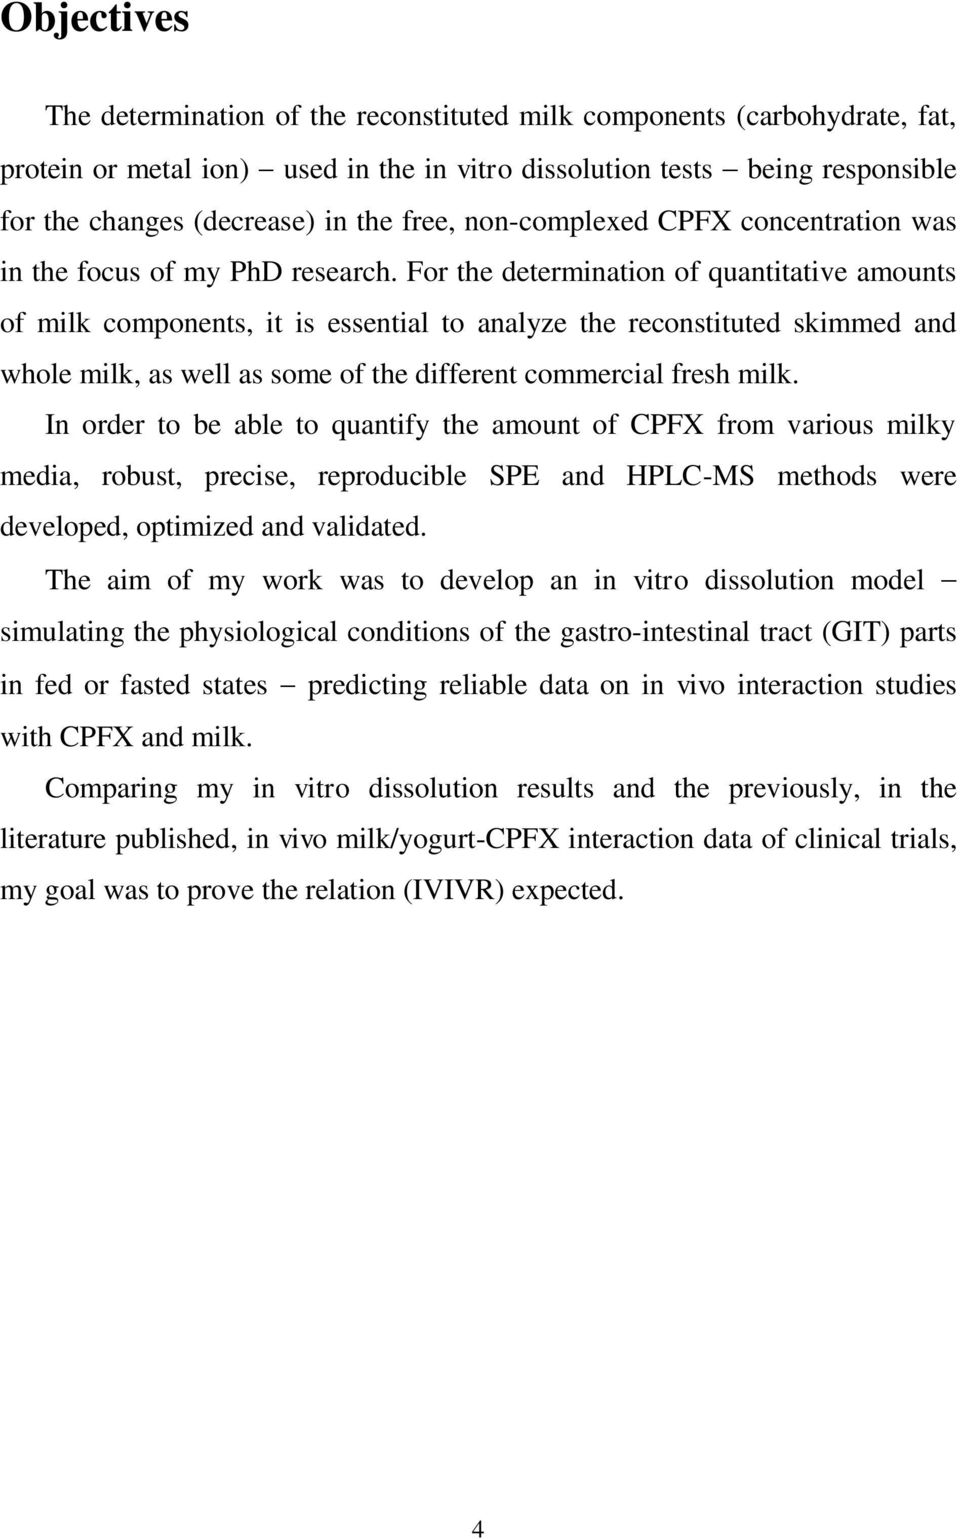 For the determination of quantitative amounts of milk components, it is essential to analyze the reconstituted skimmed and whole milk, as well as some of the different commercial fresh milk.